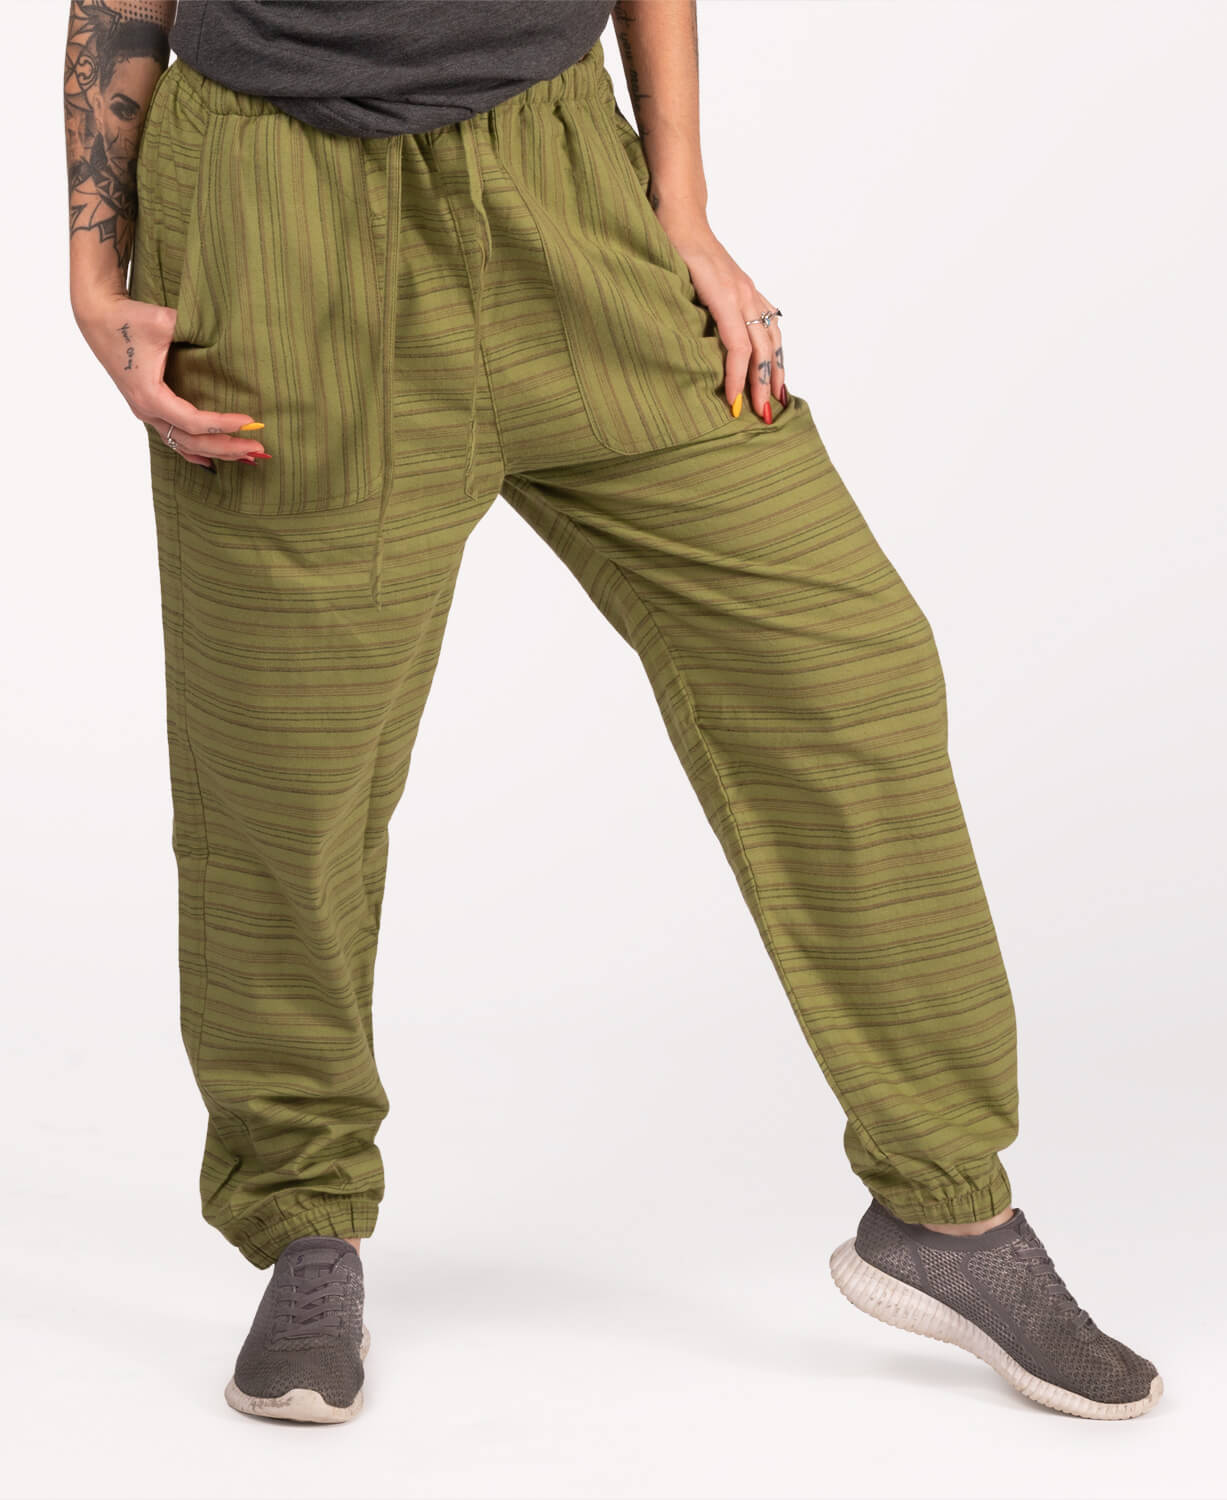 Pants With Large Crotch Top Sellers, SAVE 39% - piv-phuket.com